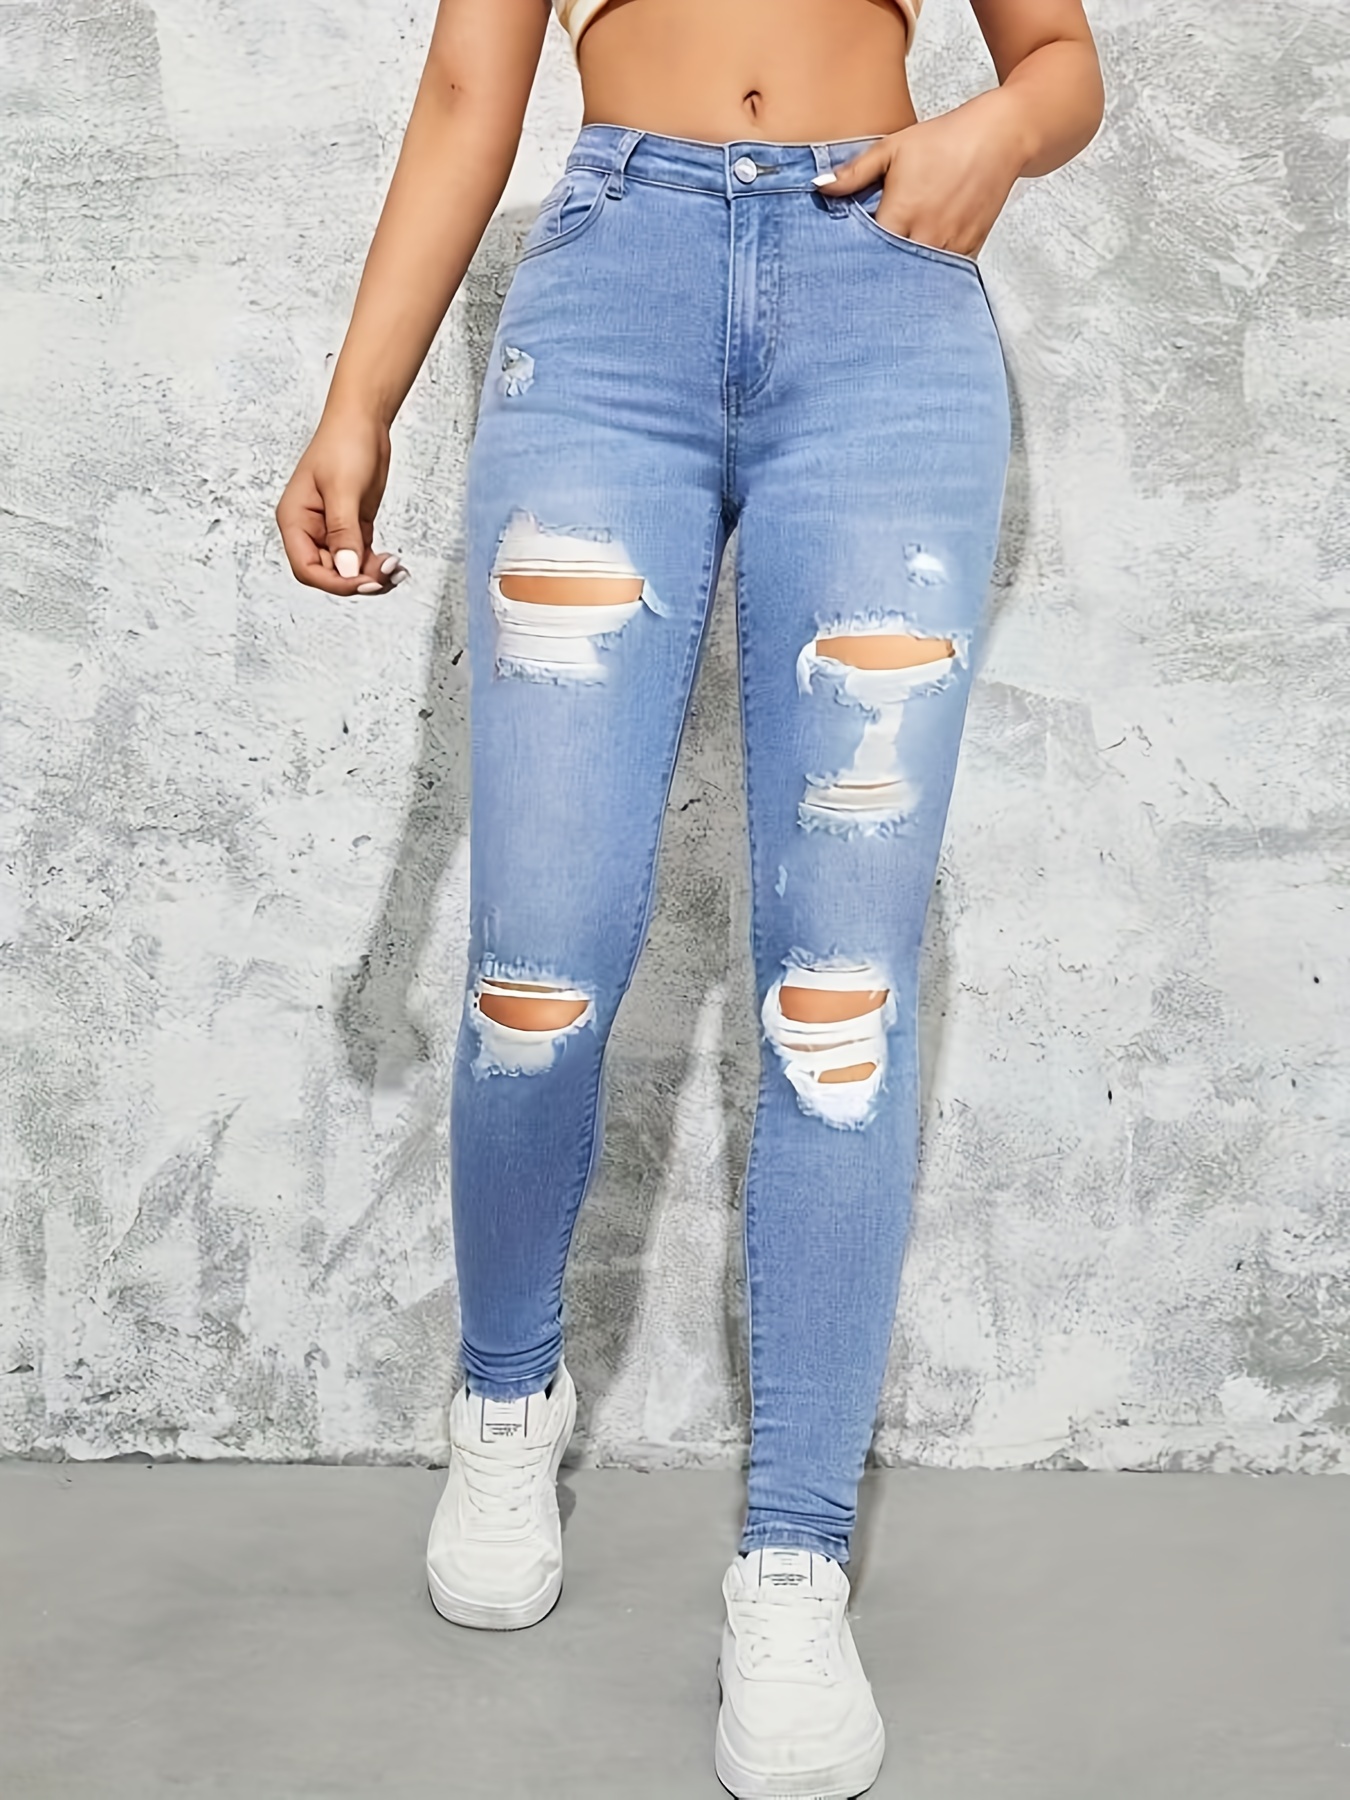 Ripped High Rise Skinny Jeans, Light Washed Blue Stretchy Sexy Distressed  Curvy Denim Pants, Women's Denim Jeans & Clothing